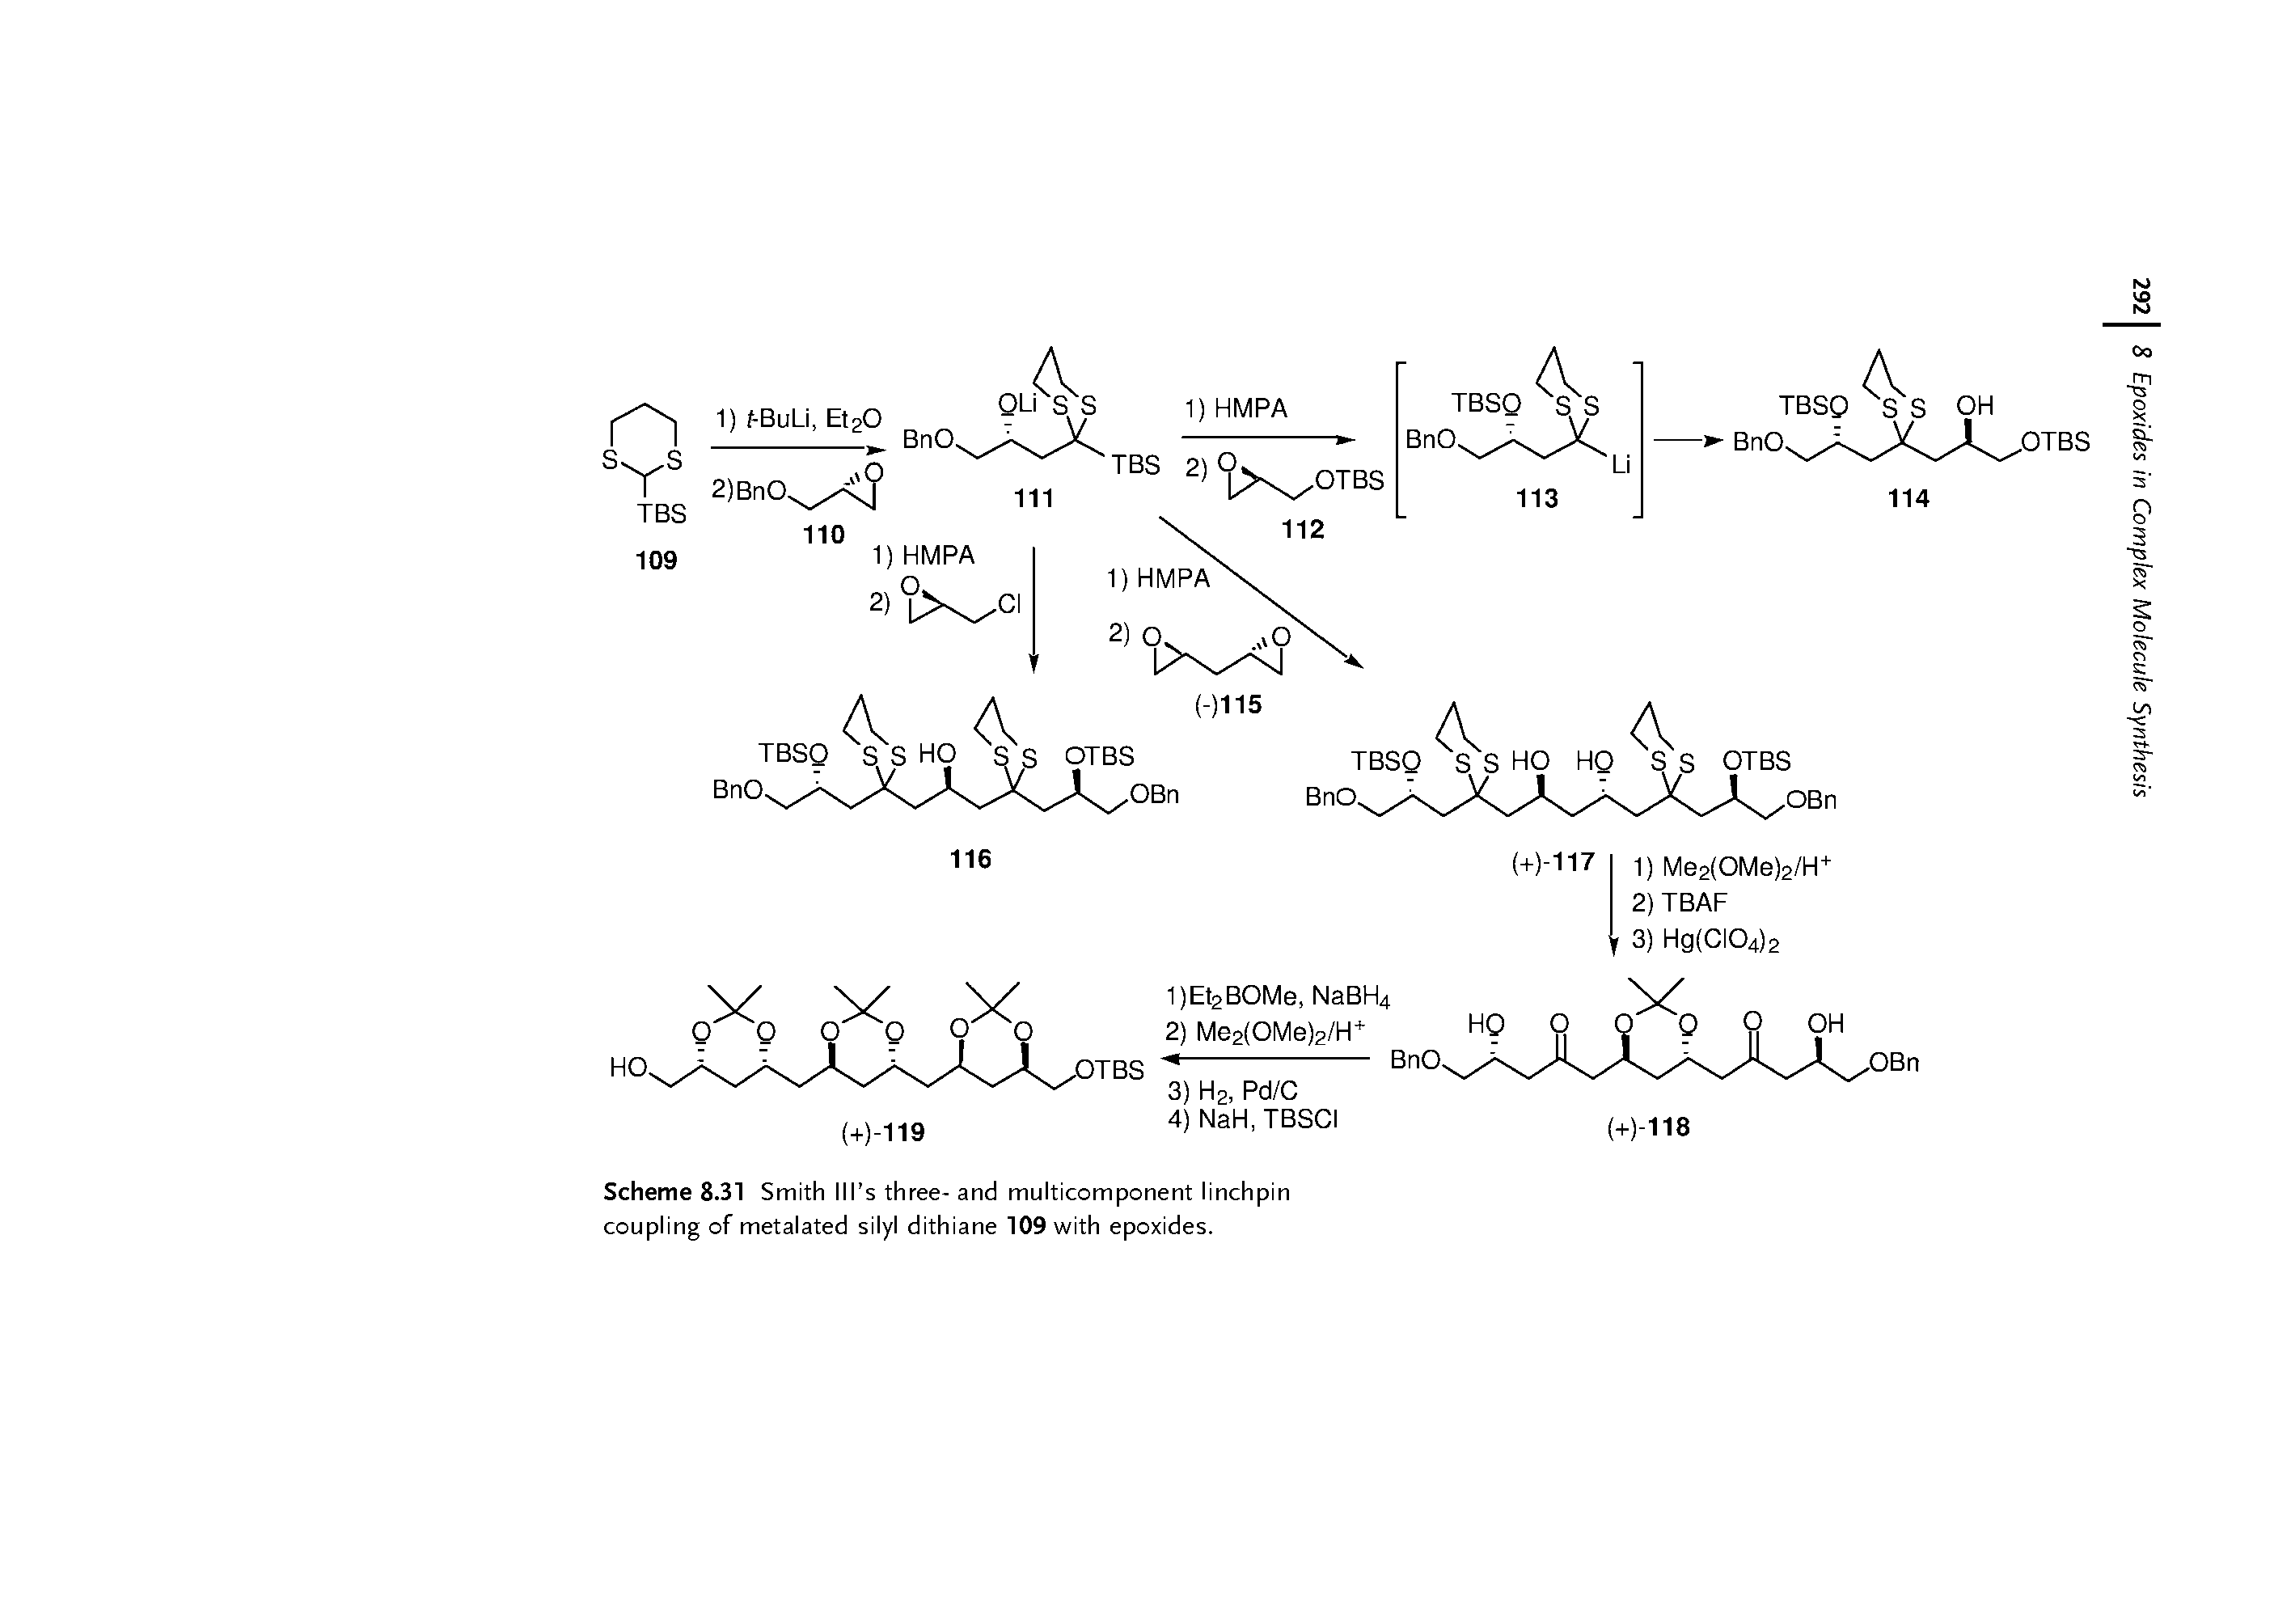 Scheme 8.31 Smith Ill s three- and multicomponent linchpin coupling of metalated silyl dithiane 109 with epoxides.